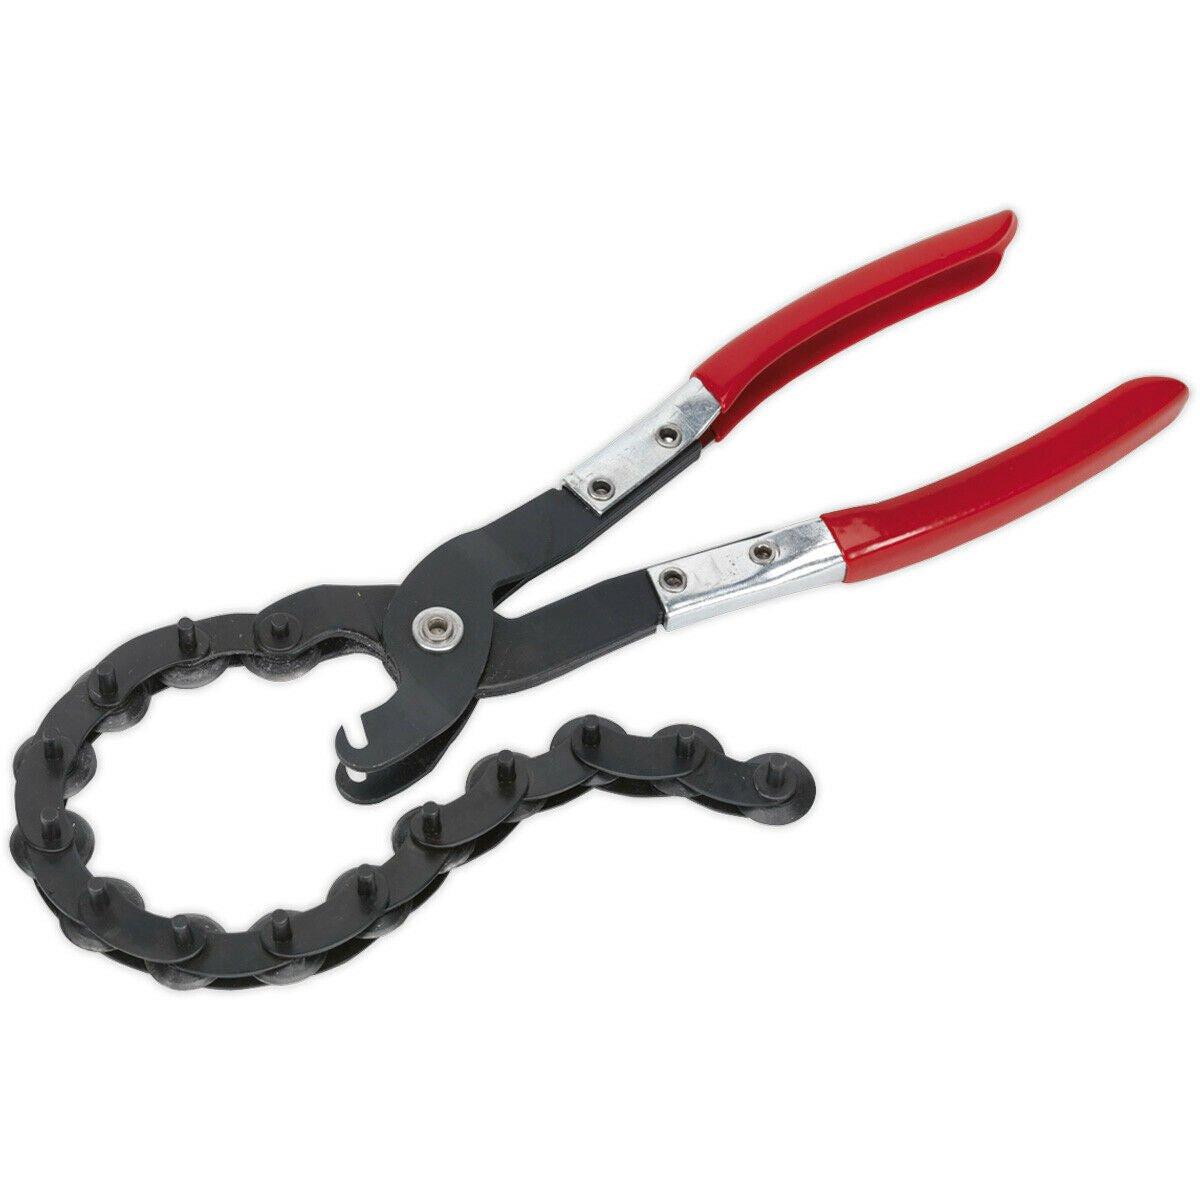 Exhaust Pipe Cutter Pliers - 83mm Cutting Capacity - Steel & Copper Tubing